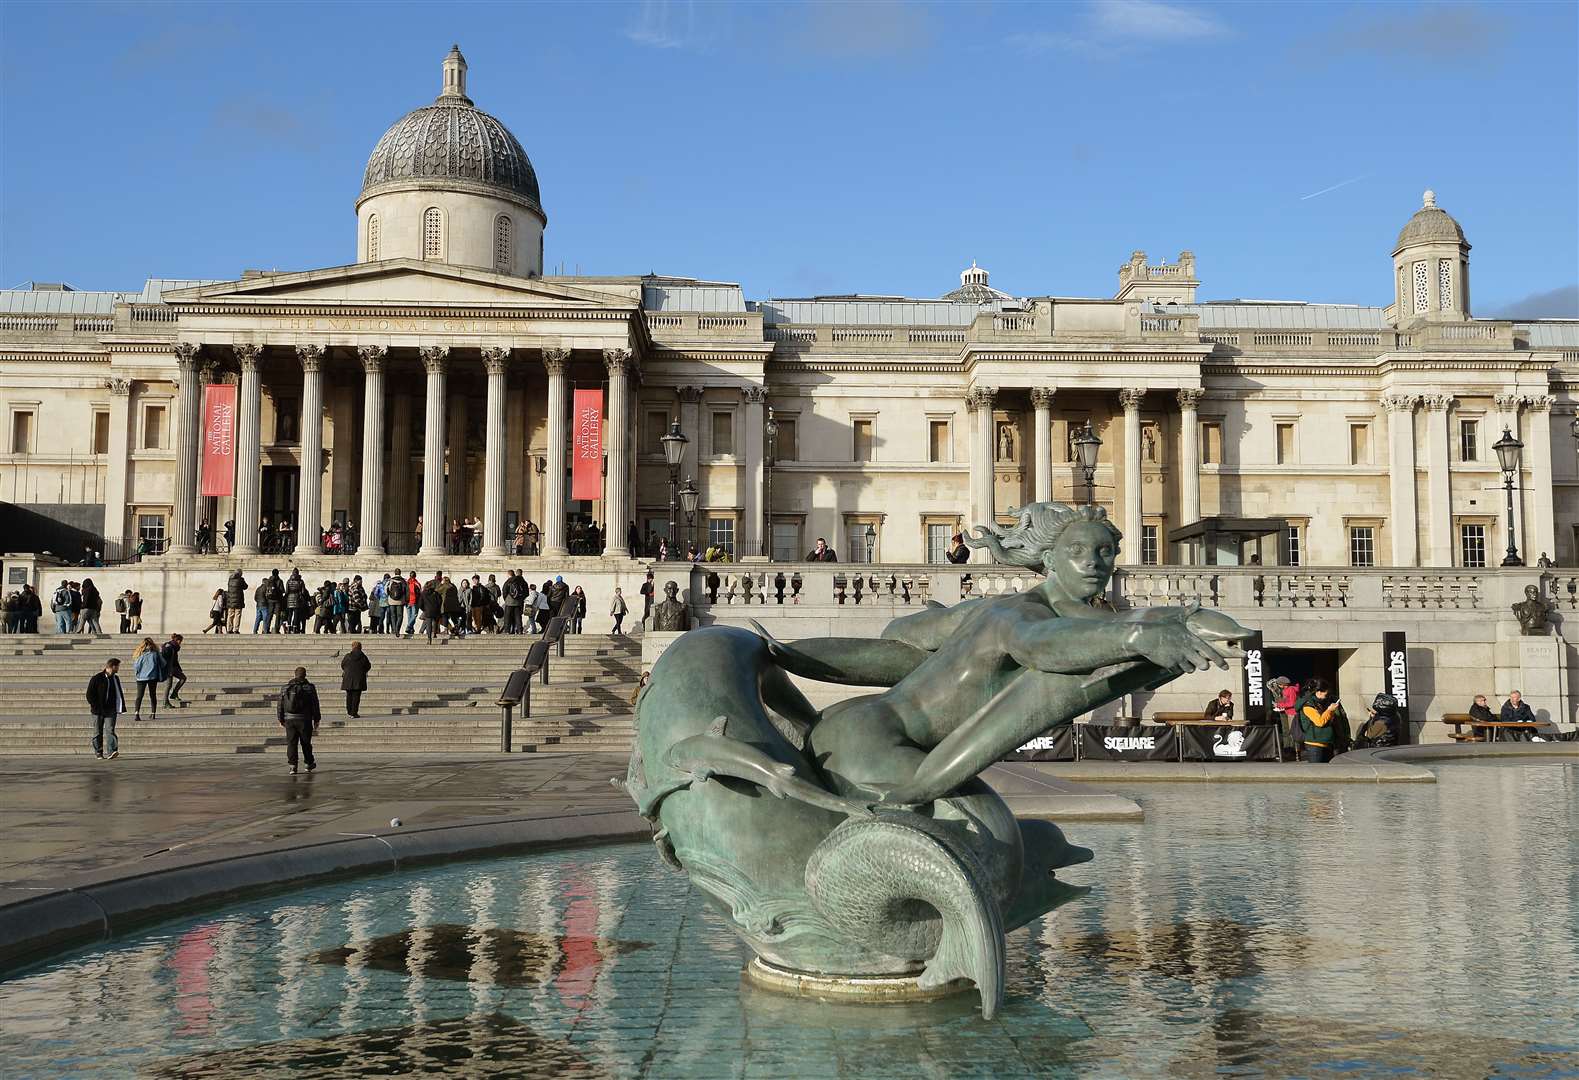 A view of the main entrance of the National Gallery in Trafalgar Square, which was founded in 1824 (John Stillwell/PA)